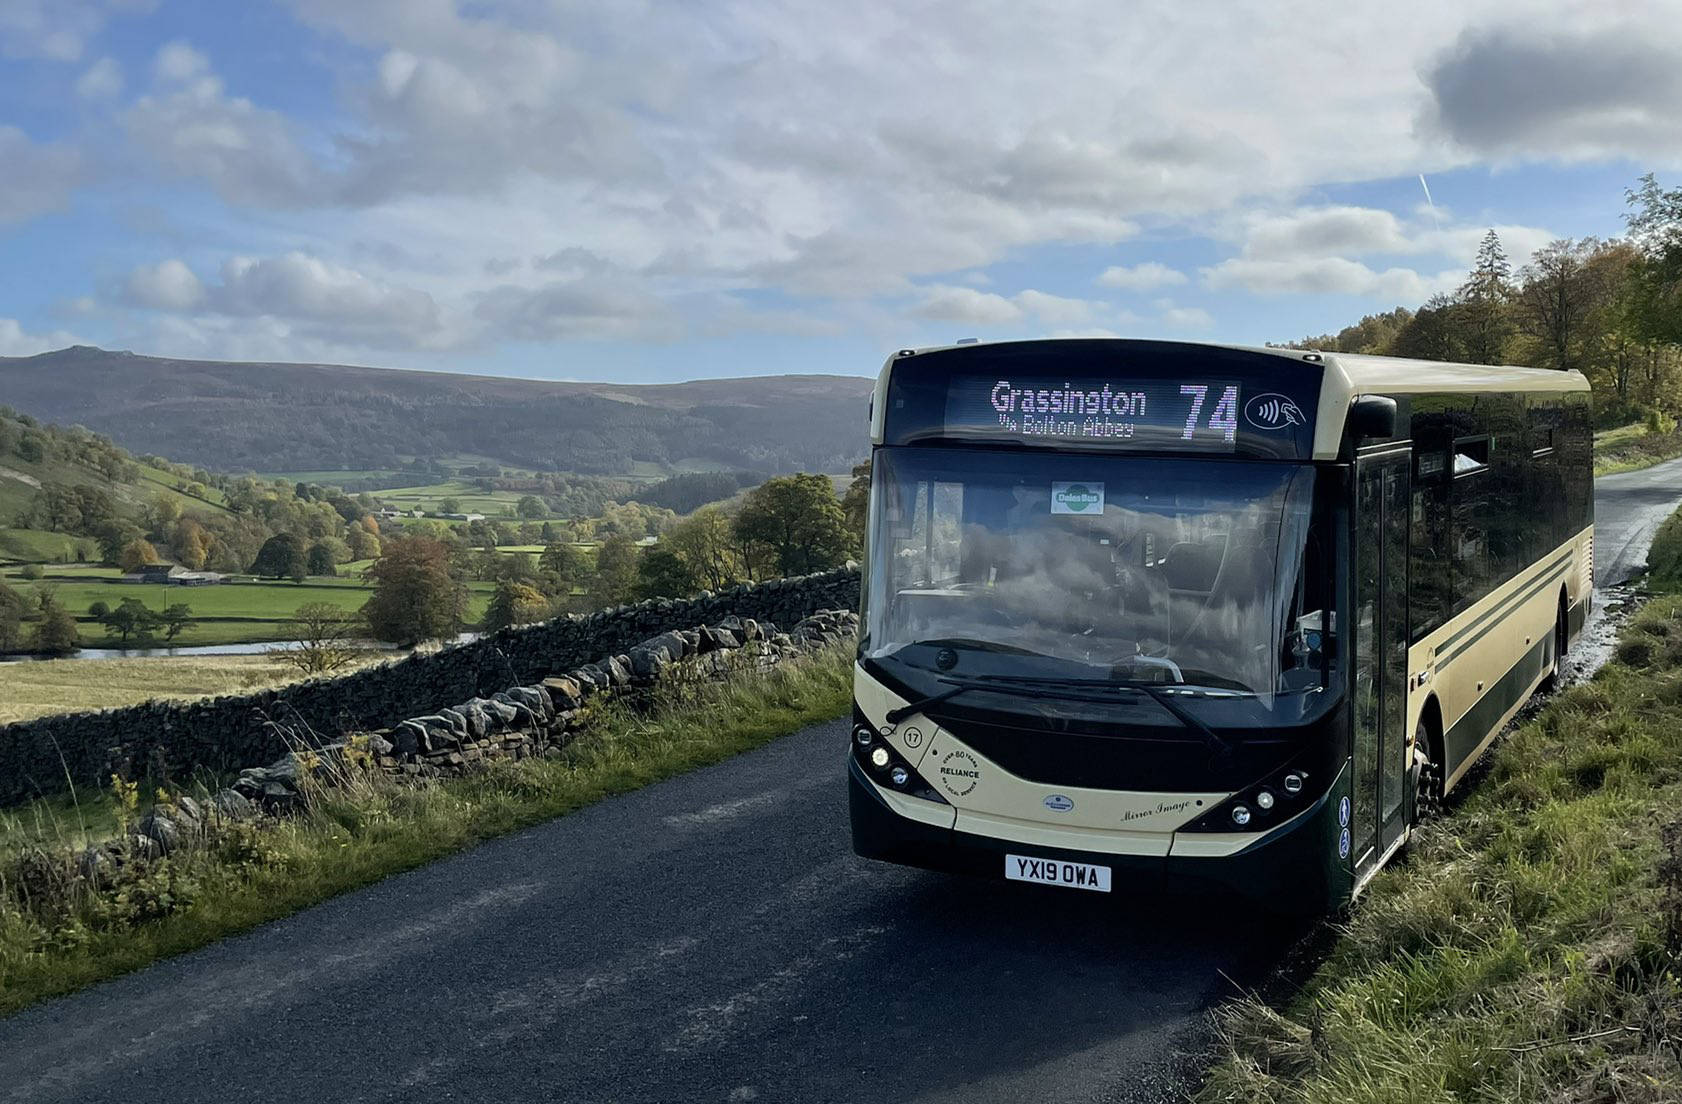 Saturday DalesBus 74 Service parked near Burnsall with a wonderful view across Wharfedale to Simon’s Seat